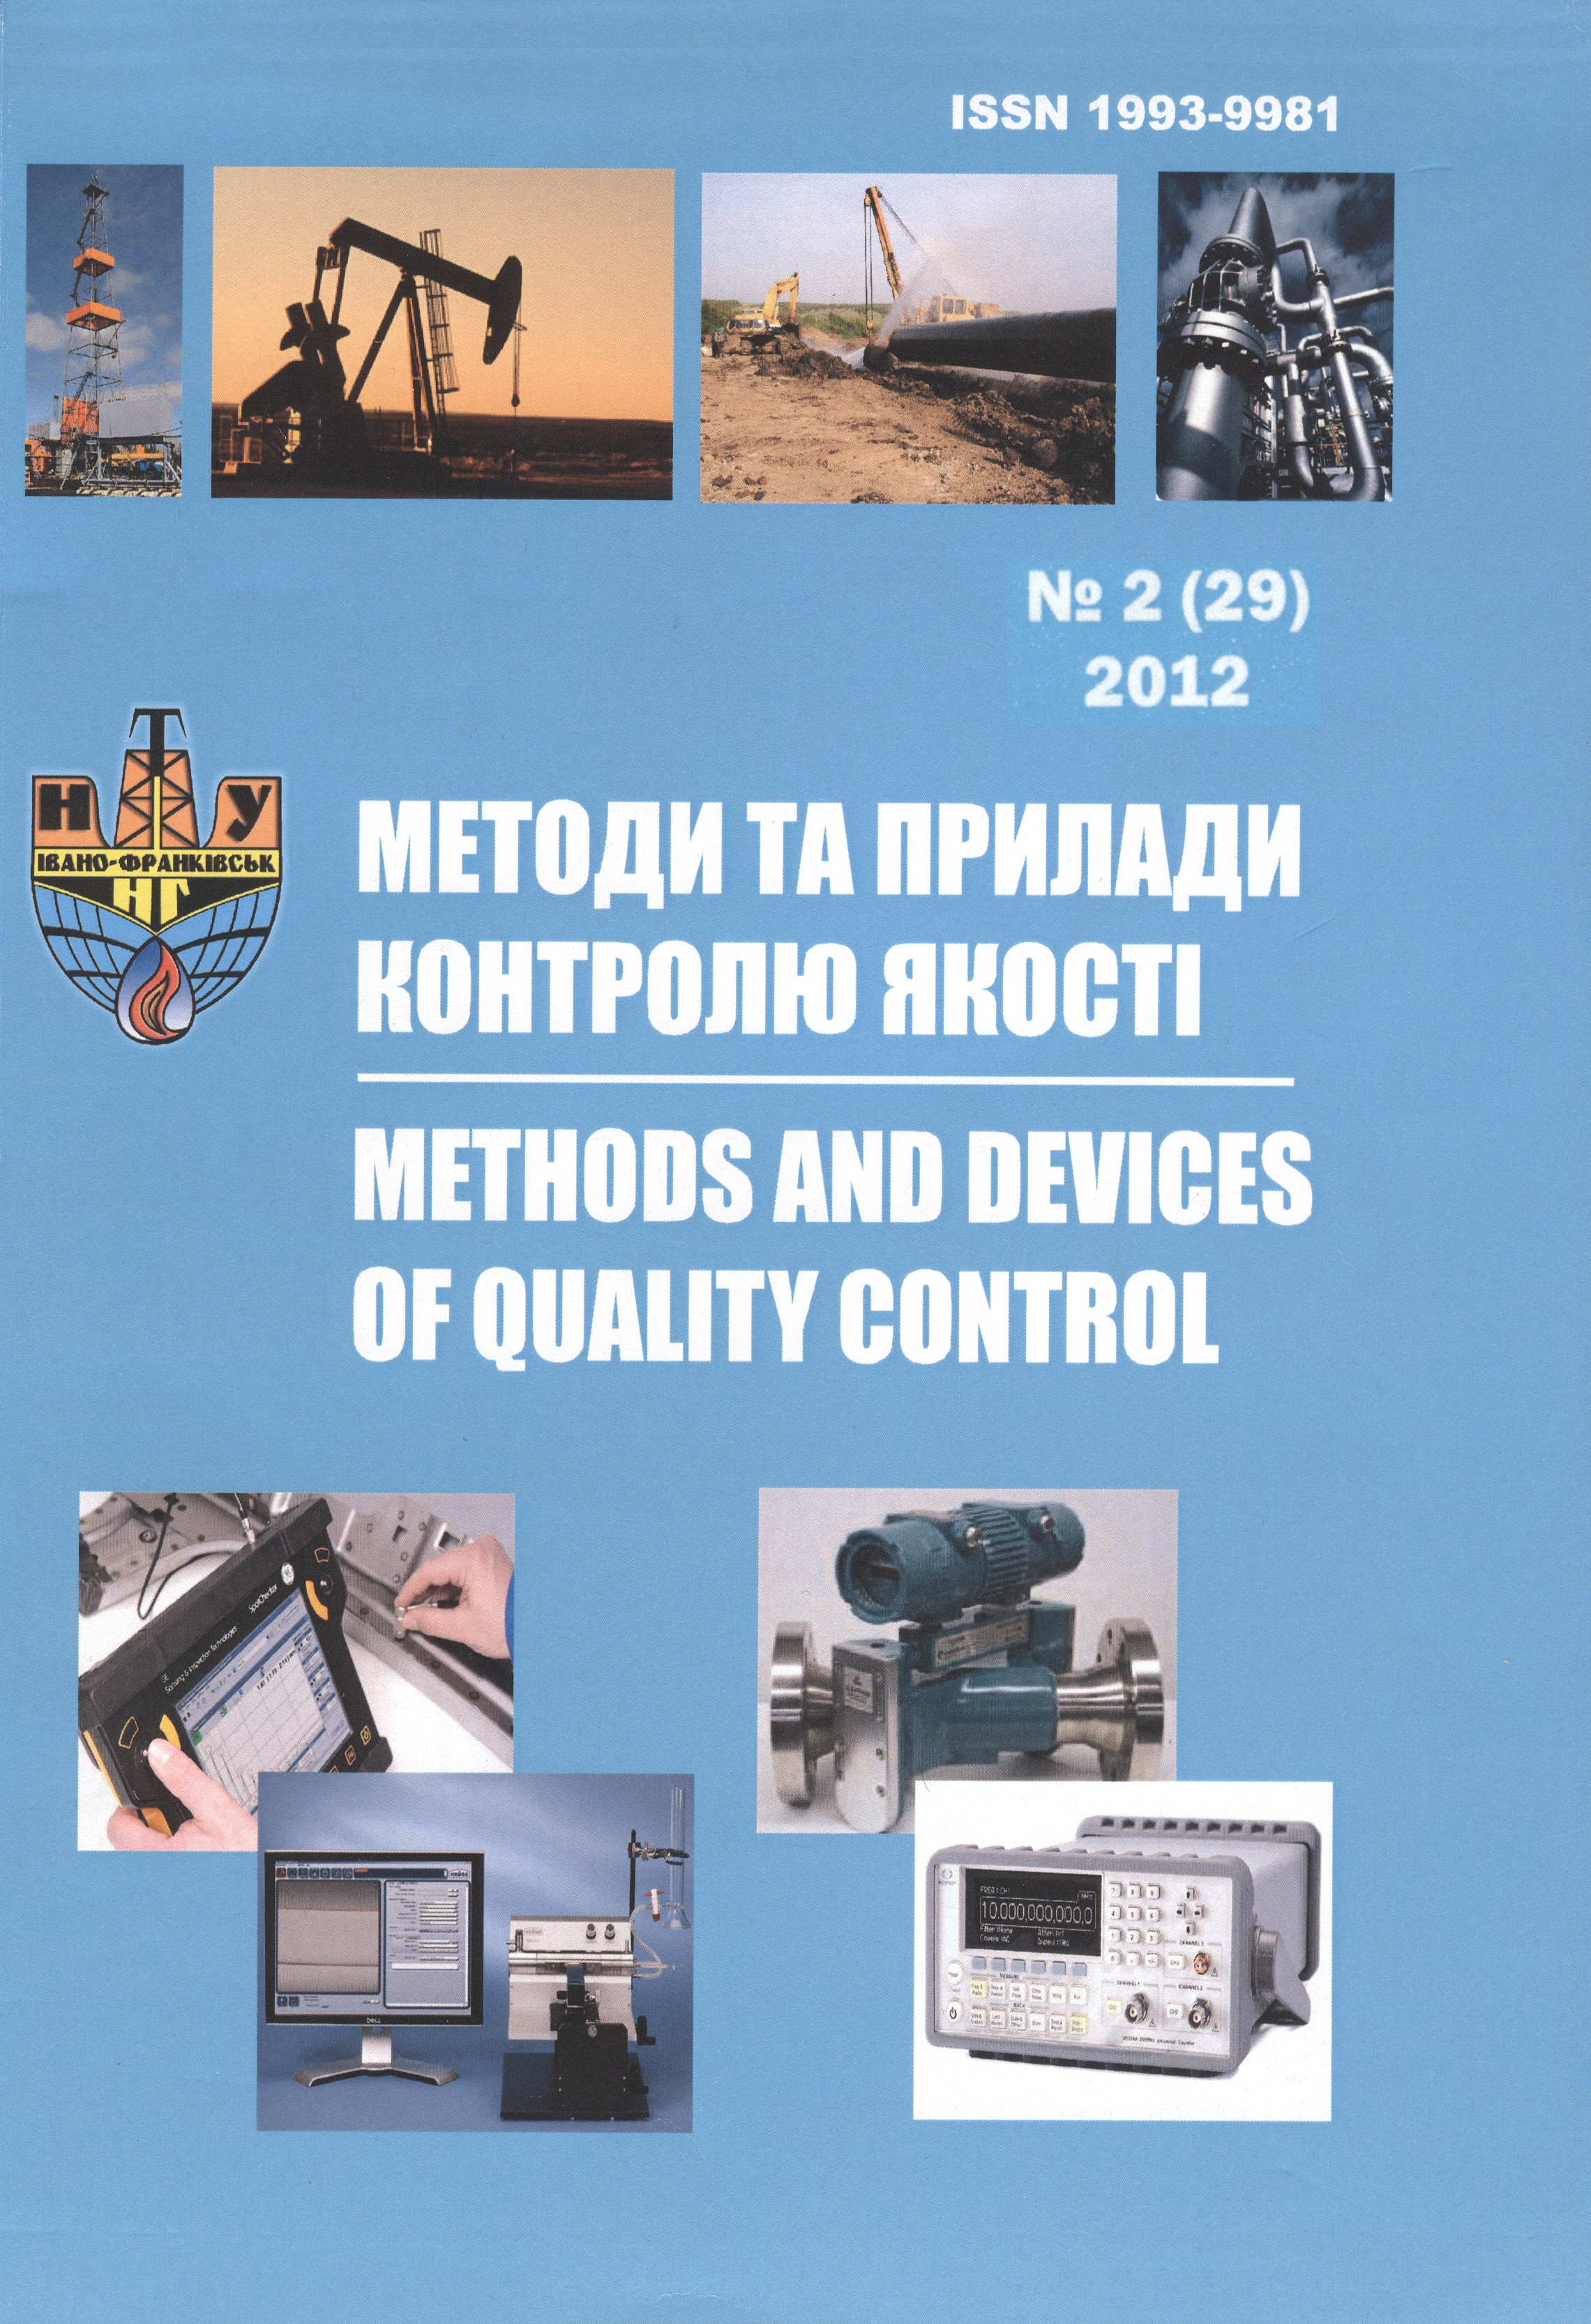 					View No. 2(29) (2012): METHODS AND DEVICES OF QUALITY CONTROL
				